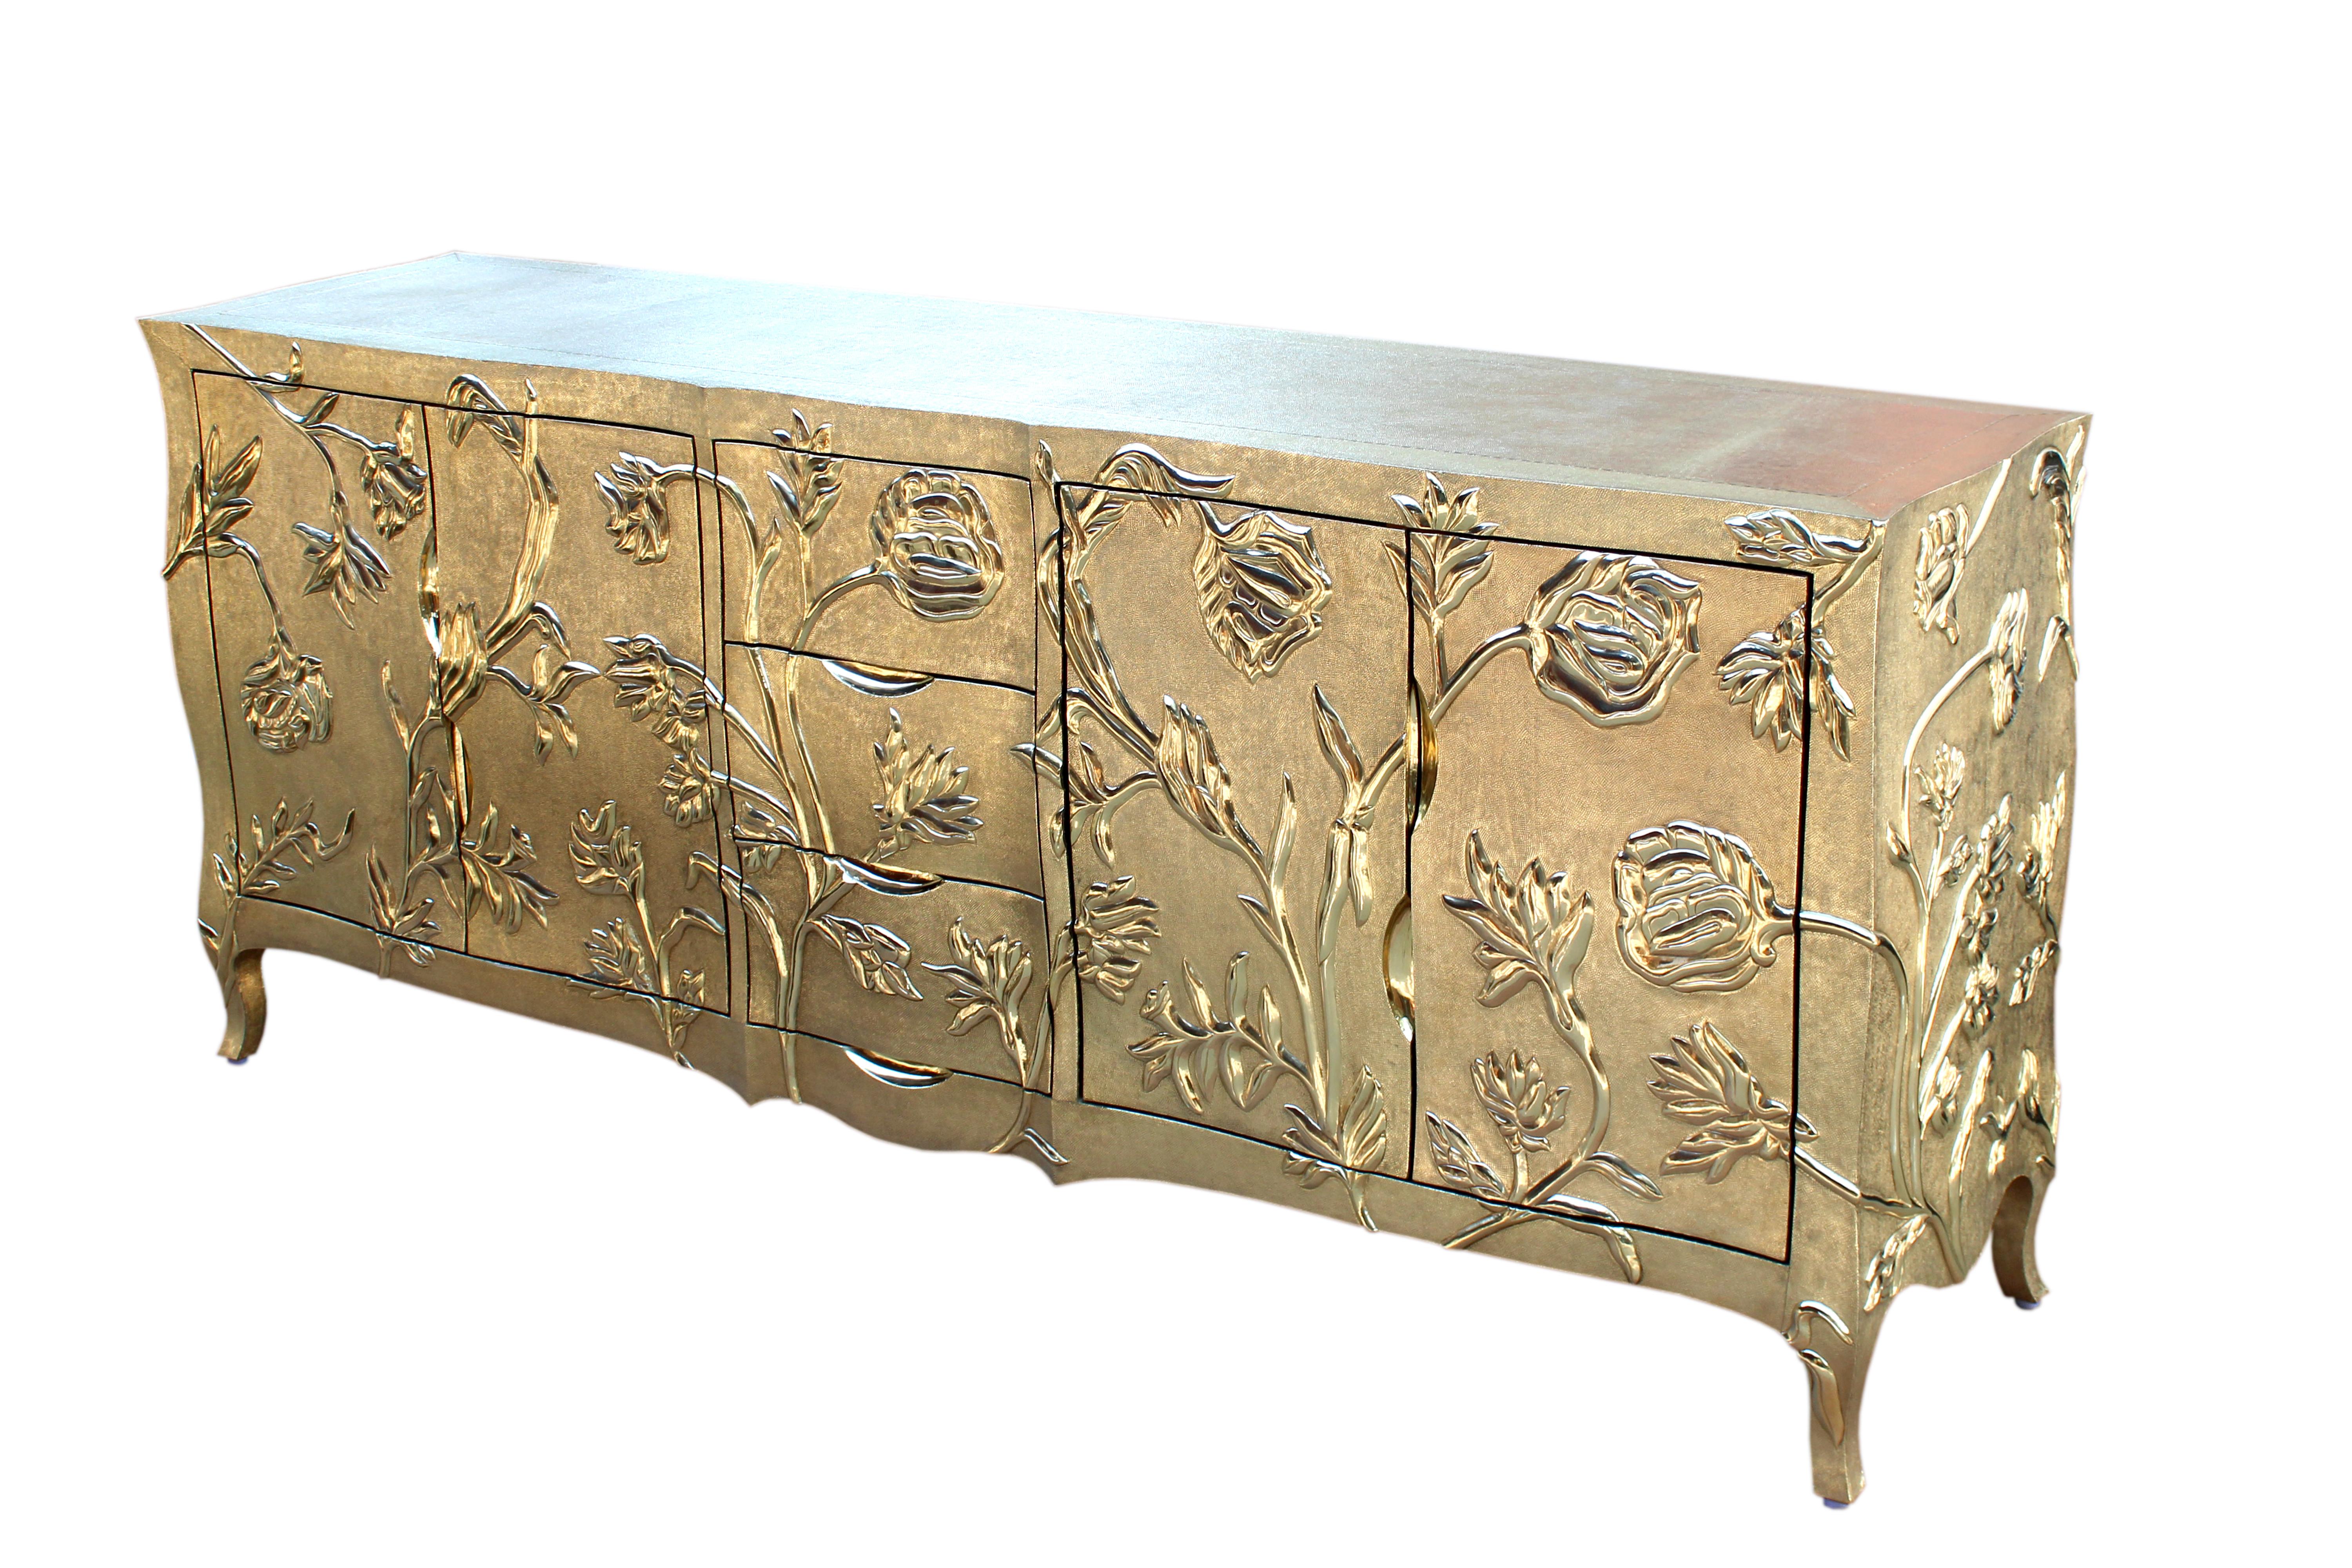 Metal Louise Floral Art Deco Sideboard Fine Hammered Brass by Paul Mathieu For Sale